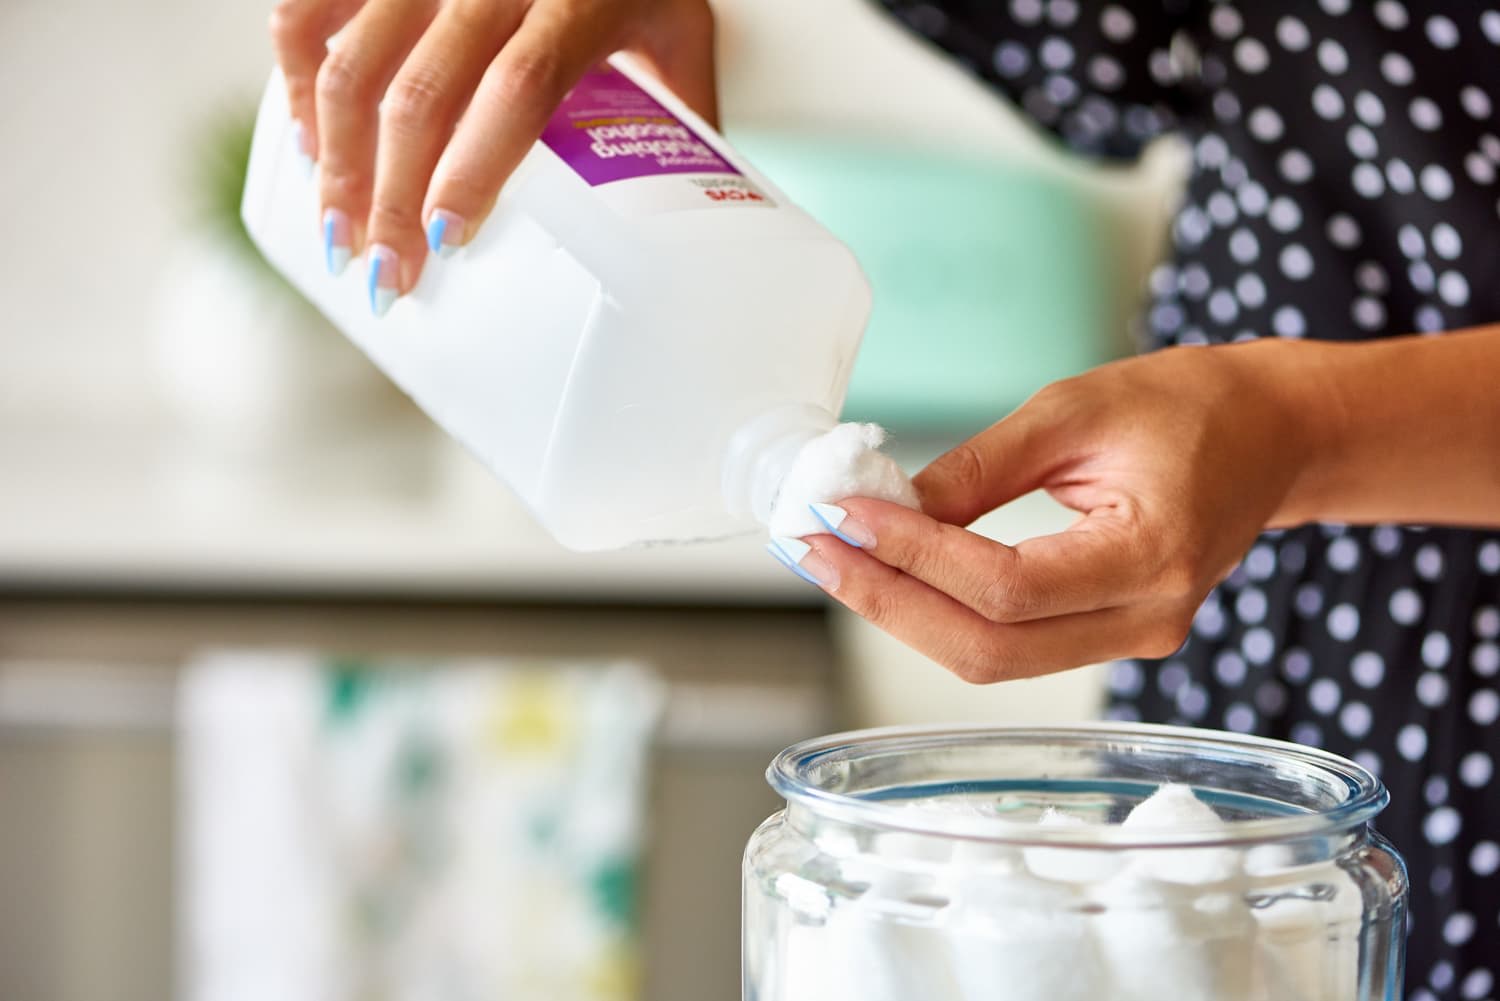 5 Things You Might be Forgetting to Disinfect, According to an Epidemiologist